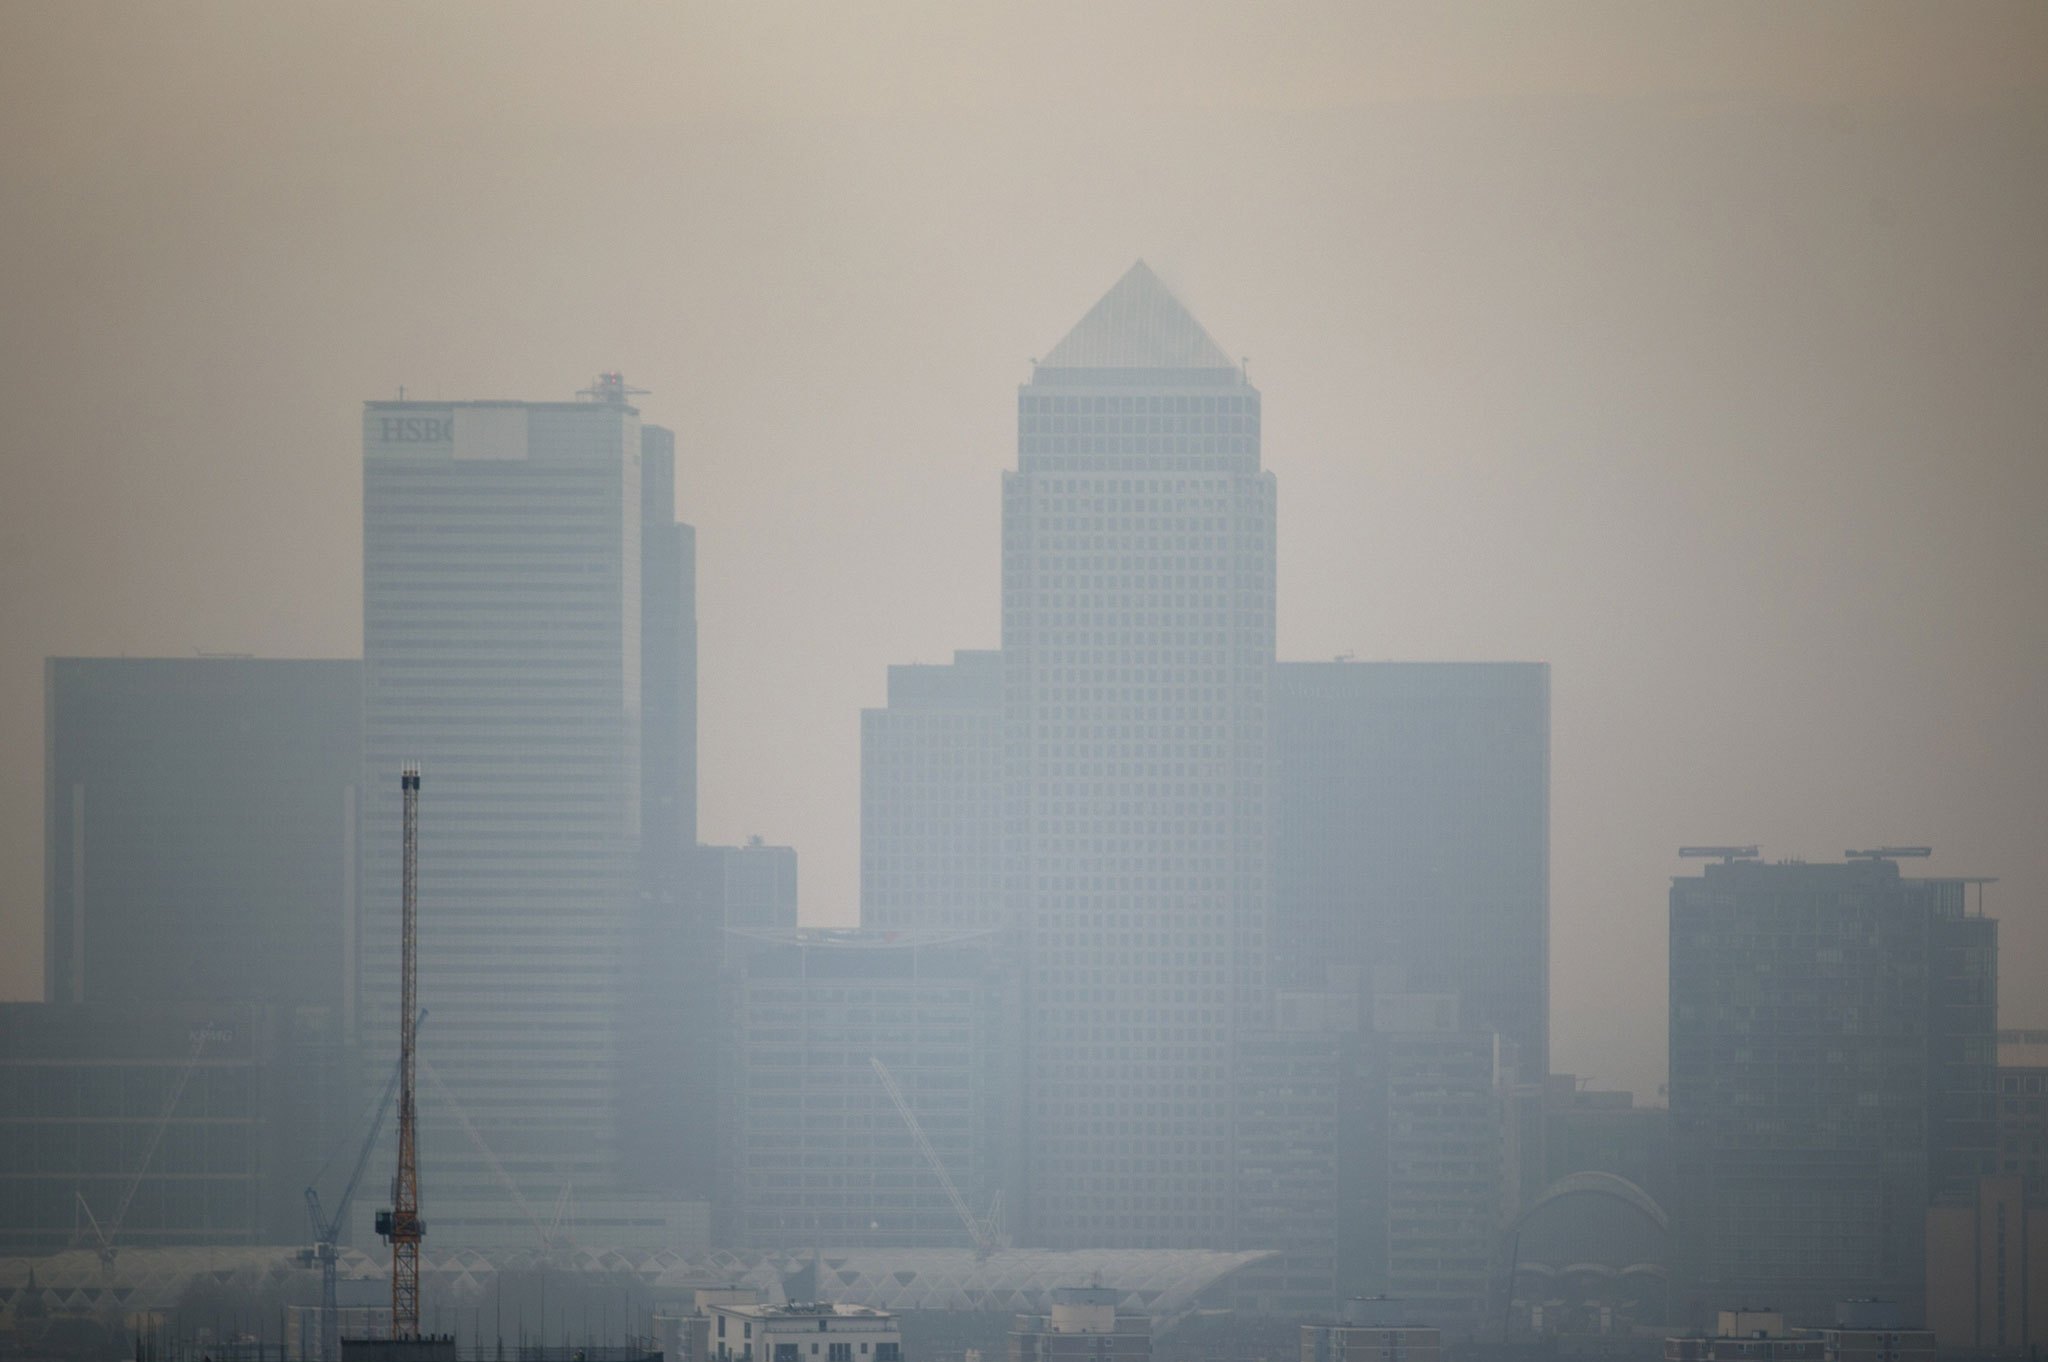 Skyscrapers of the Canary Wharf business district in London shrouded in smog